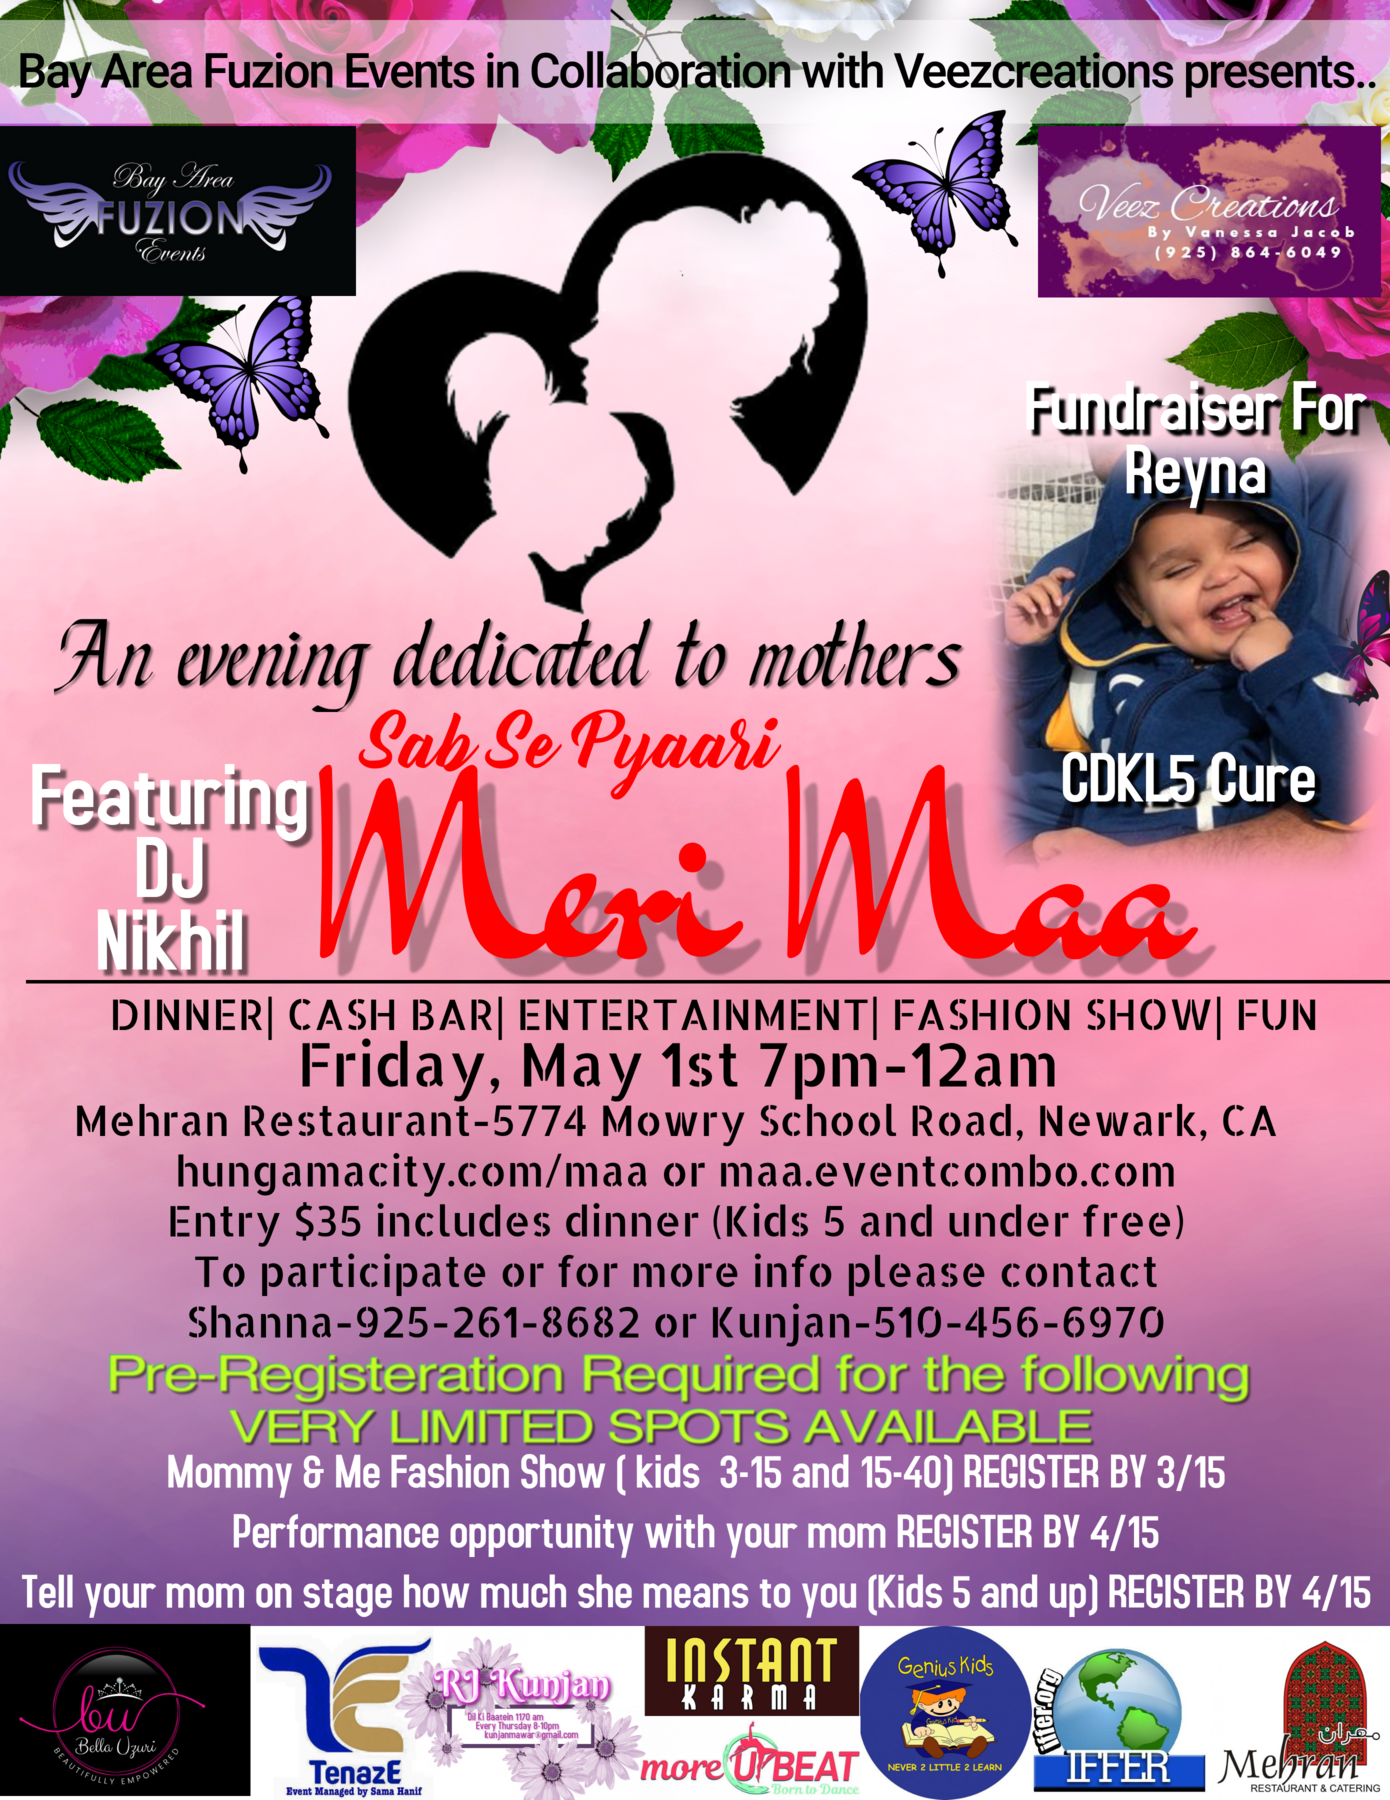 Meri Maa-An evening dedicated to mothers~Fundraiser for Baby Reyna